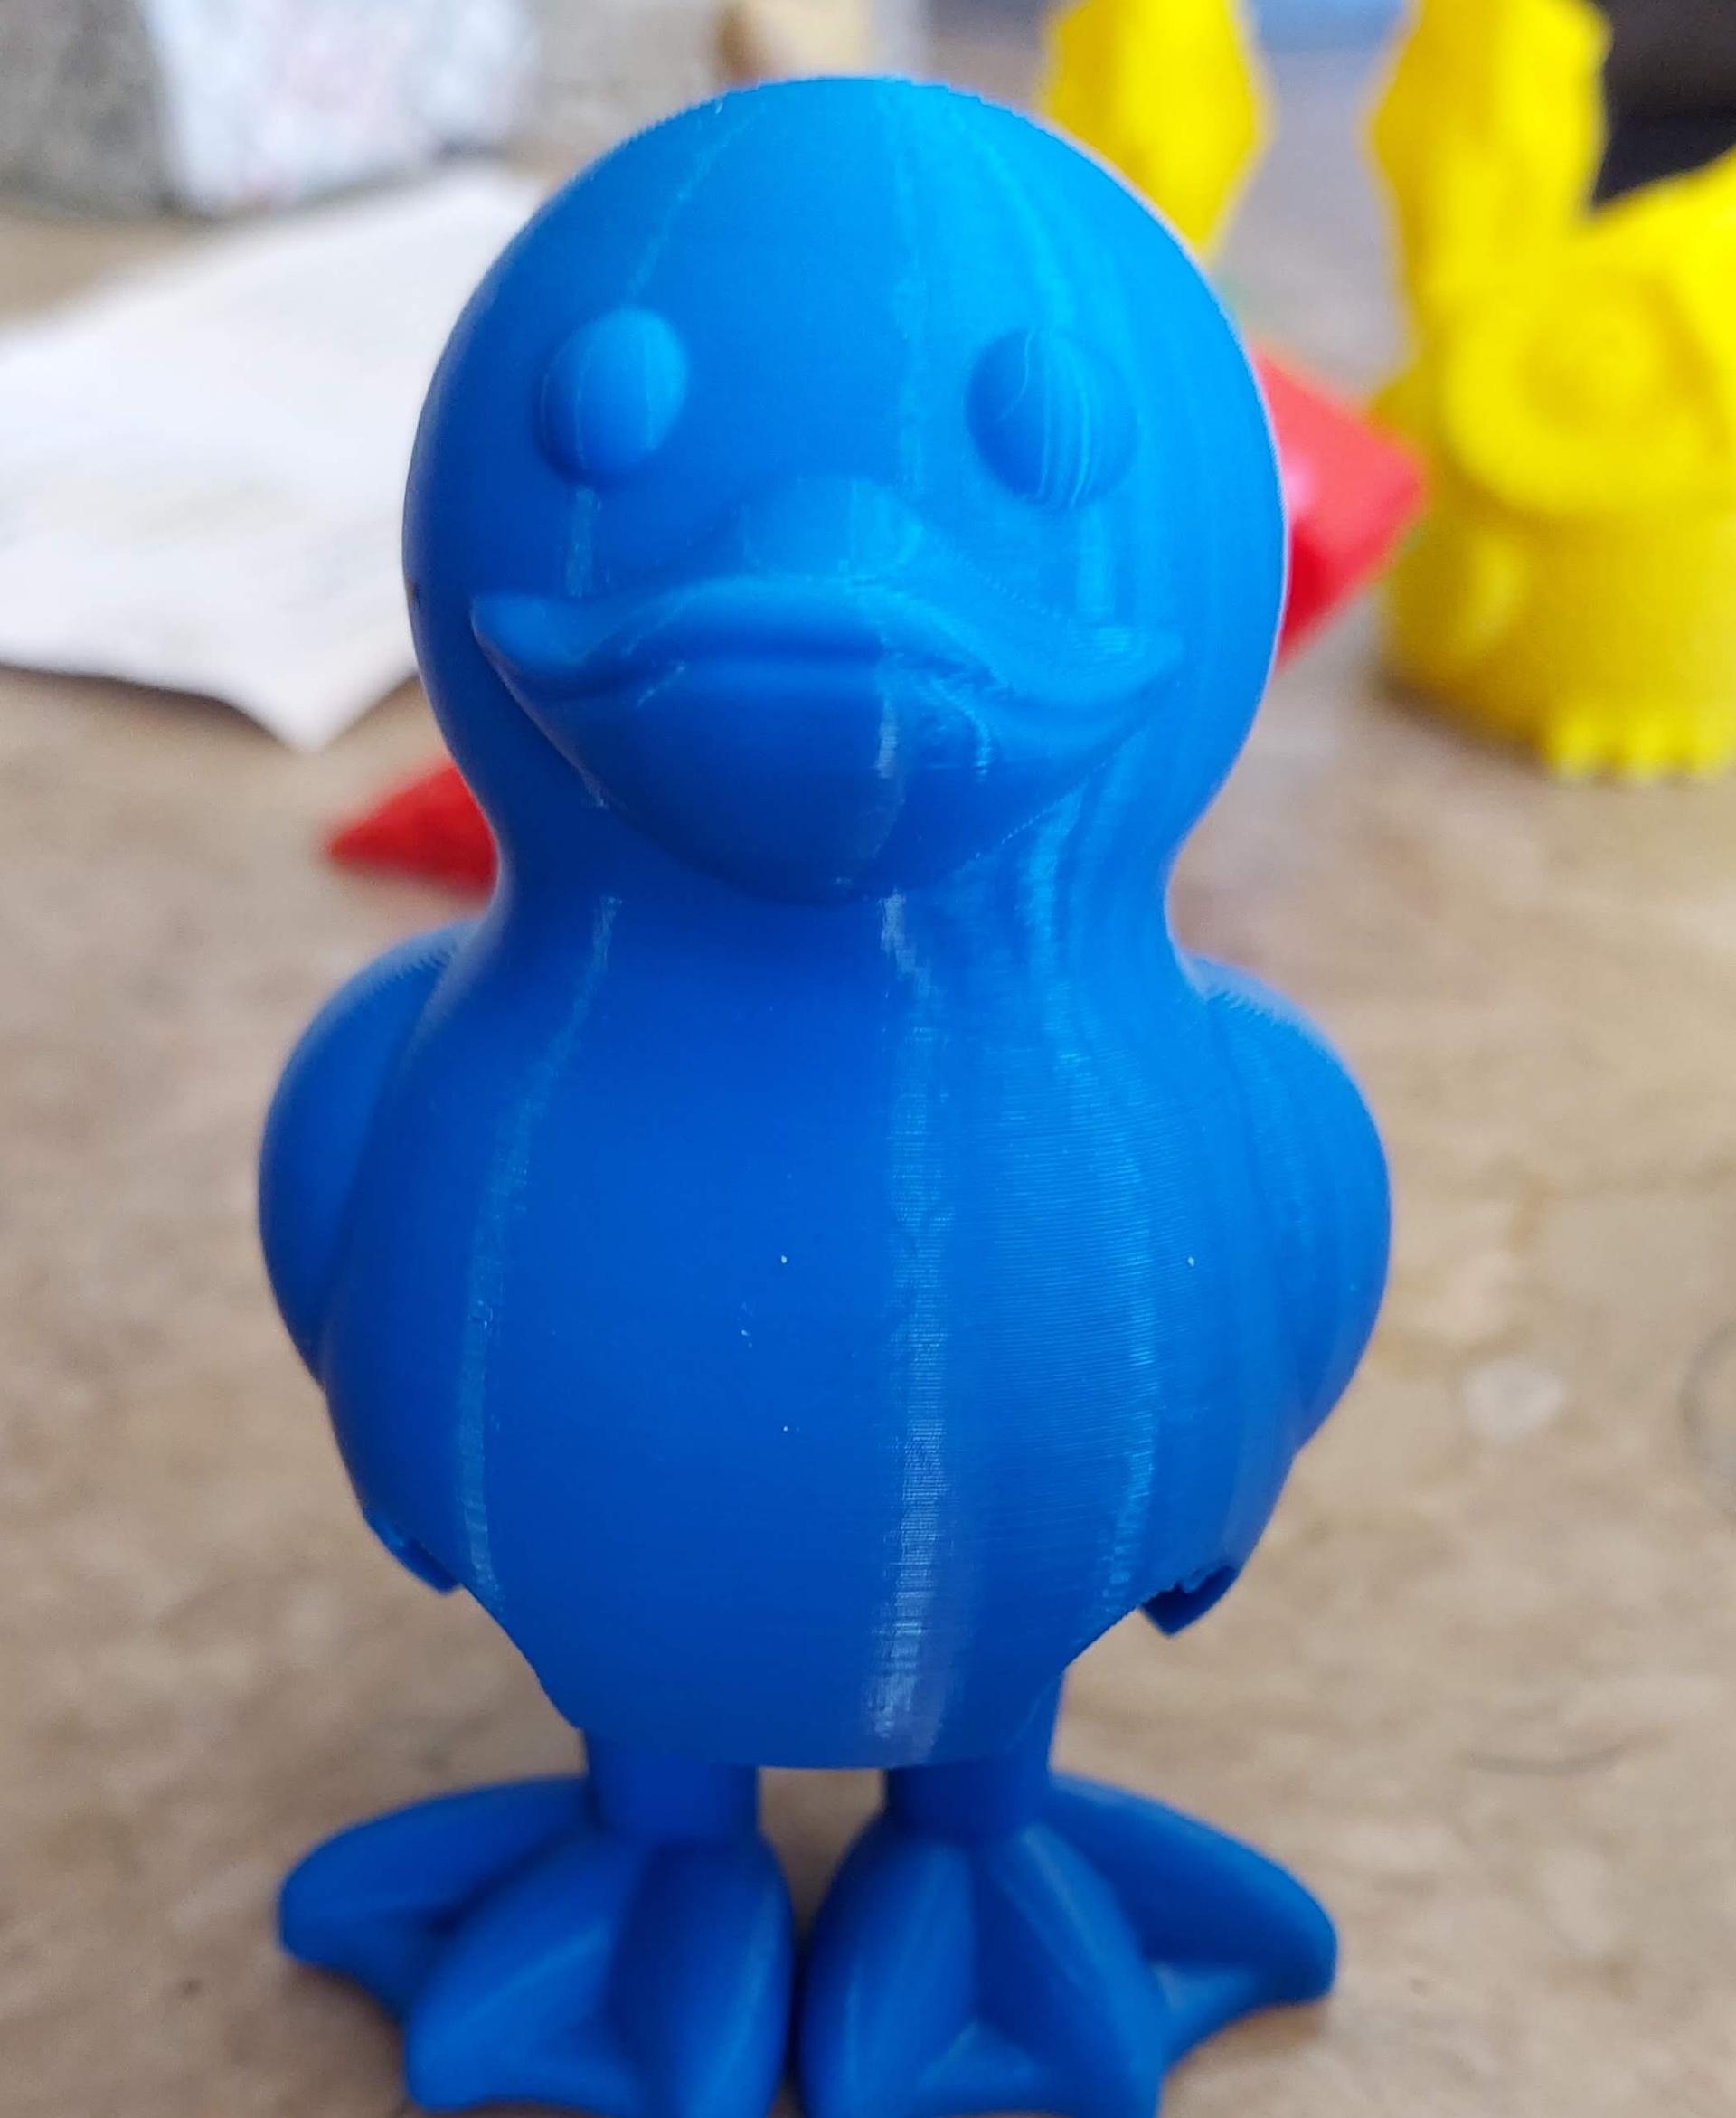 Articulating Spring Duck - One of the most popular things I make - 3d model